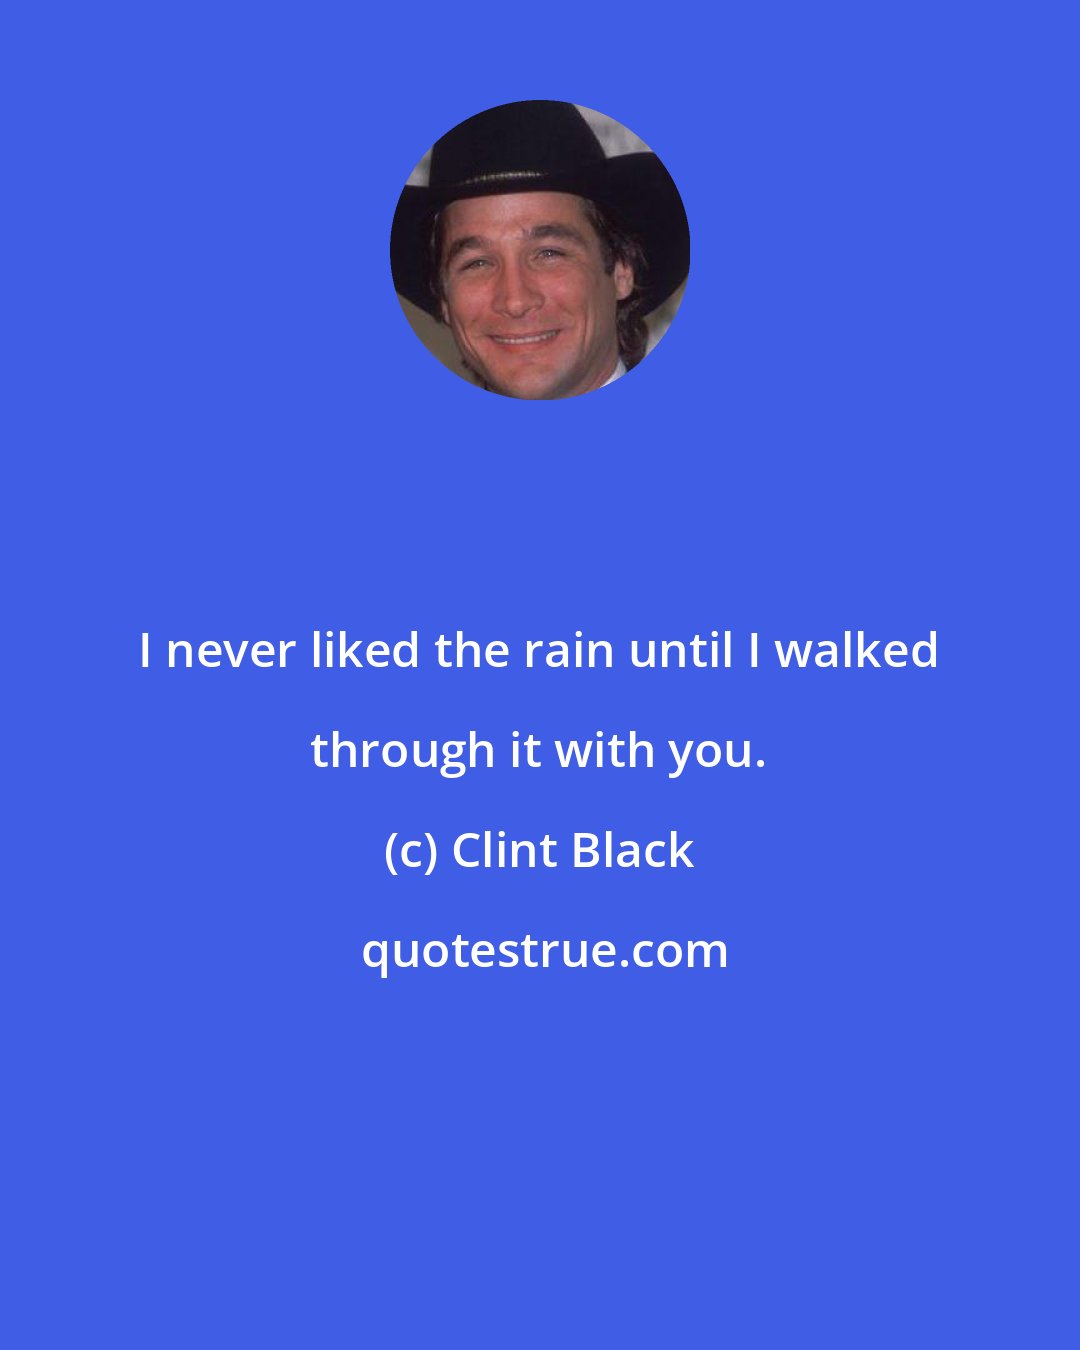 Clint Black: I never liked the rain until I walked through it with you.